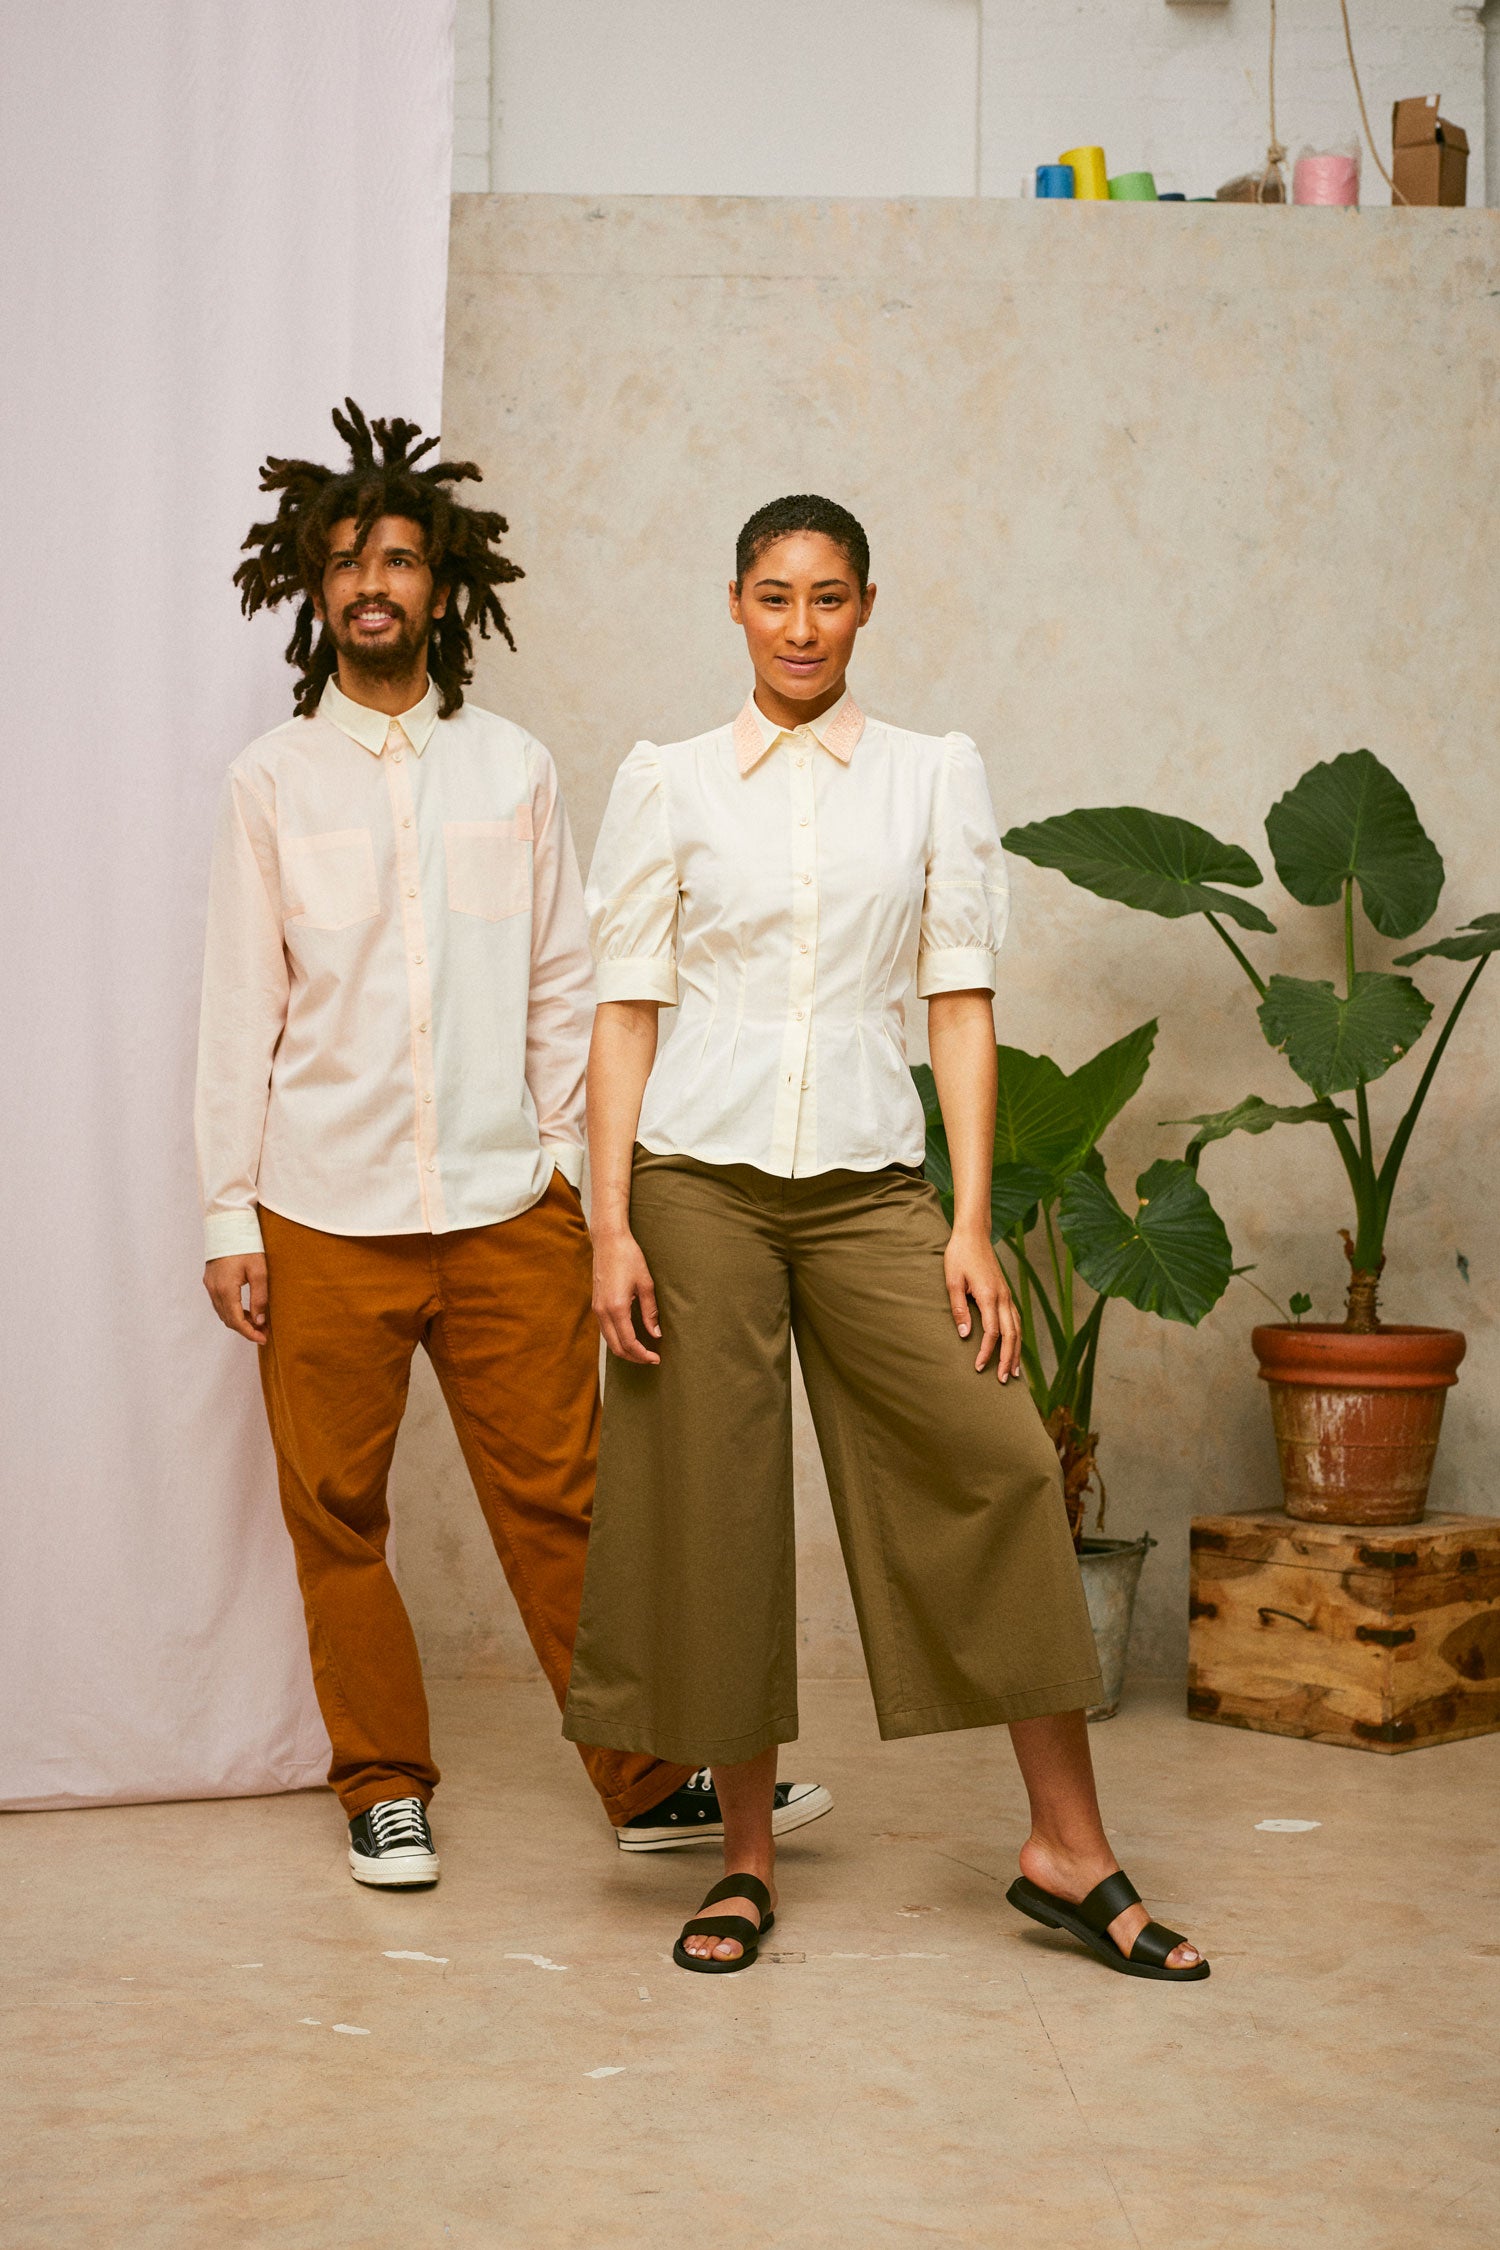 Full length shot of male and female model. He wears Saywood's Eddy Mens mens patchwork Shirt with patch pockets in orange and yellow. Worn with tabacco trousers and black Converse. She wears Saywood's Joni yellow blouse with orange lace collar and Amelia khaki wide leg trousers and black sandals. A plant and drop of pink fabric can be seen in the background.